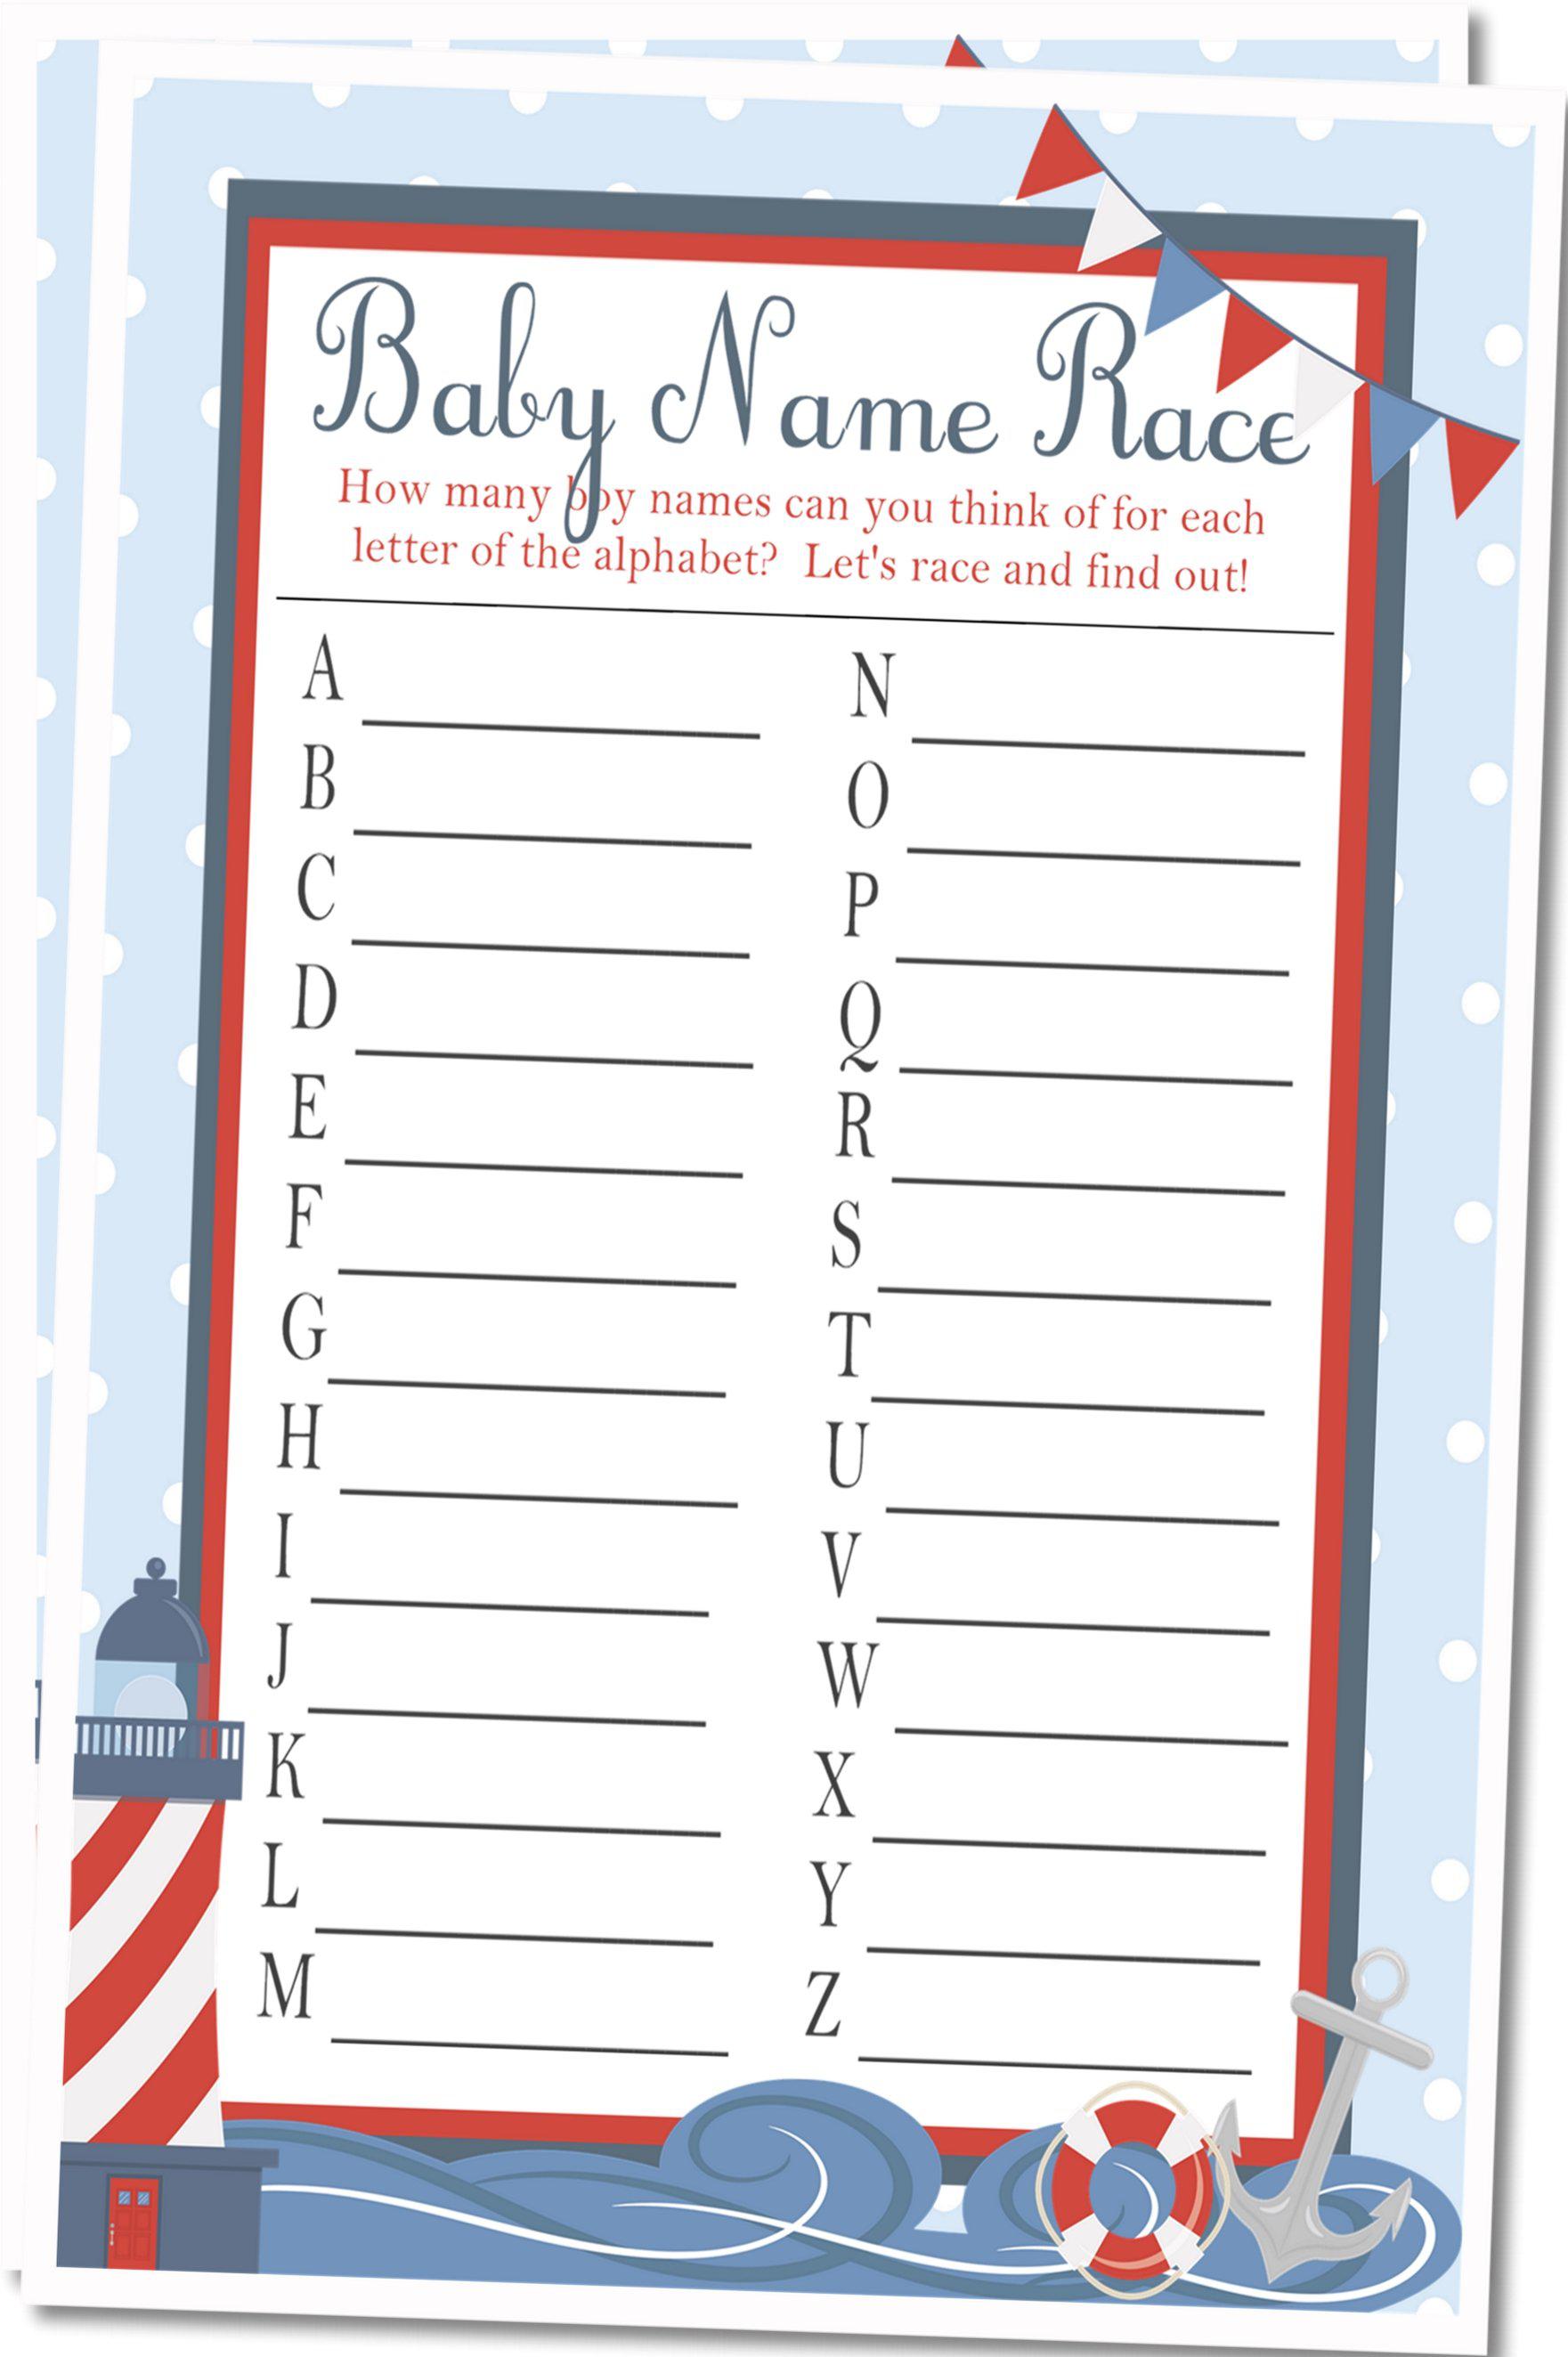 Boys Nautical Baby Shower Name Race Game Cards